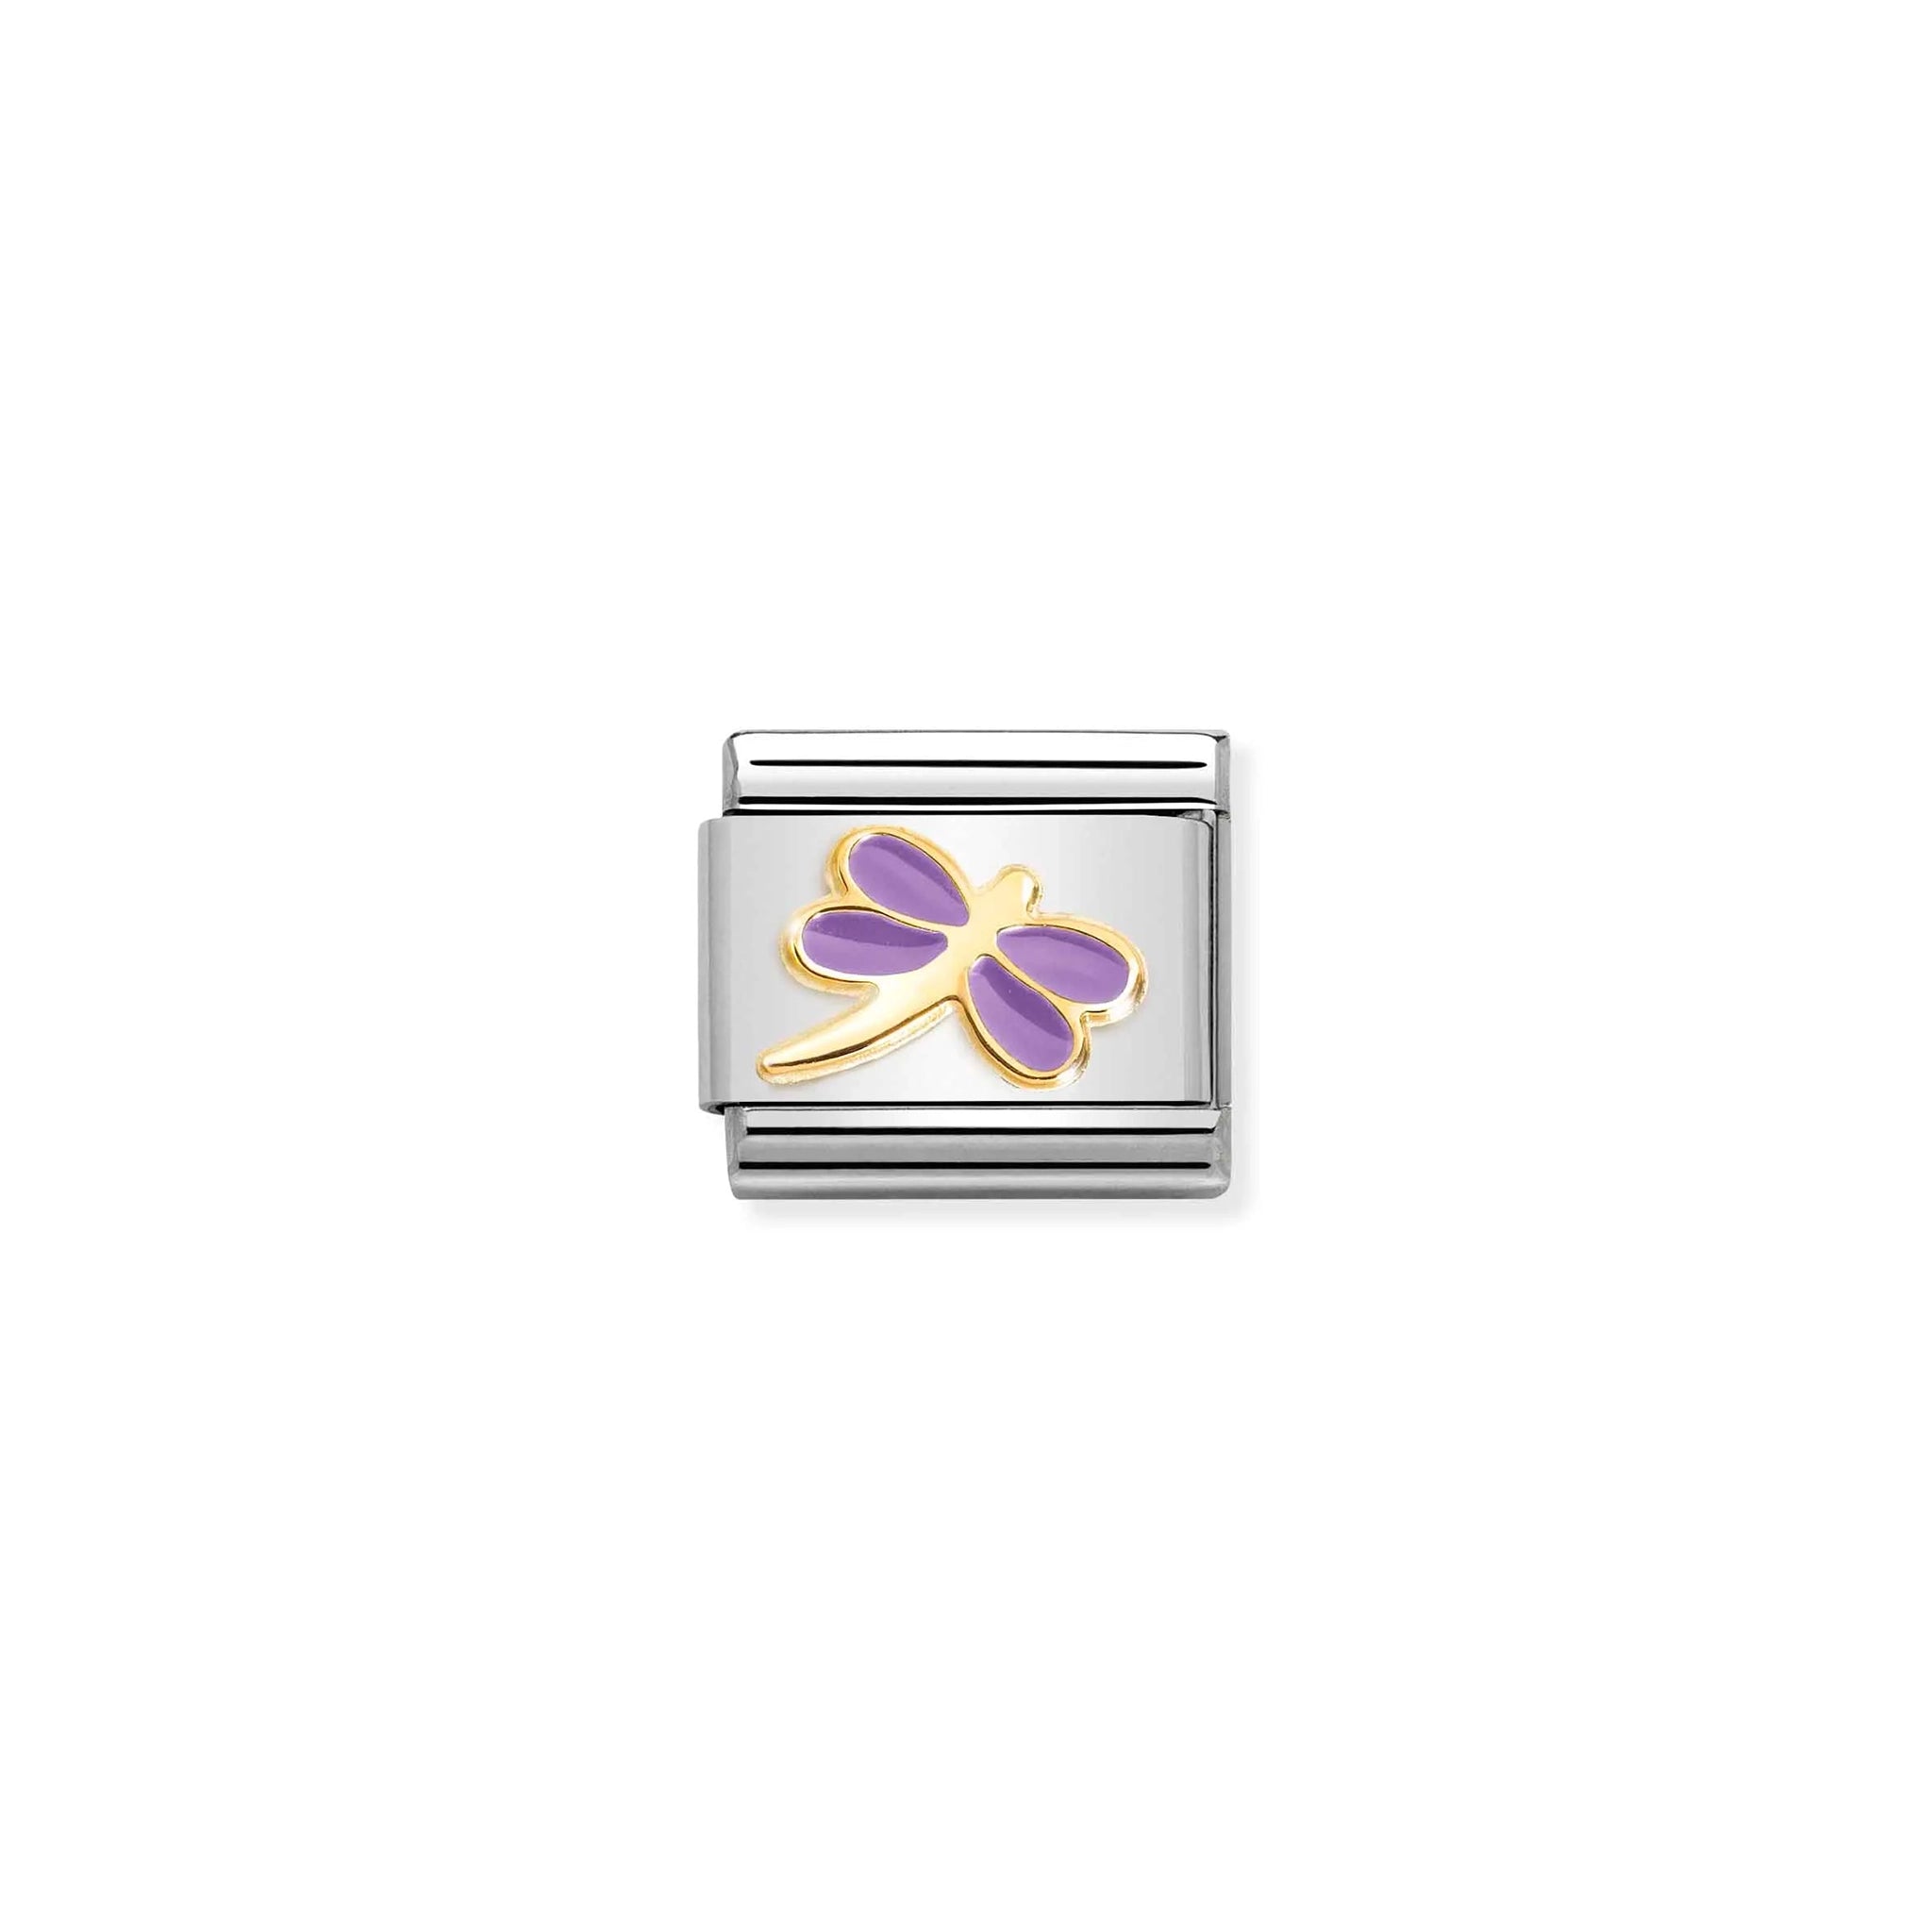 A Nomination charm featuring a gold dragonfly with purple enamel wings